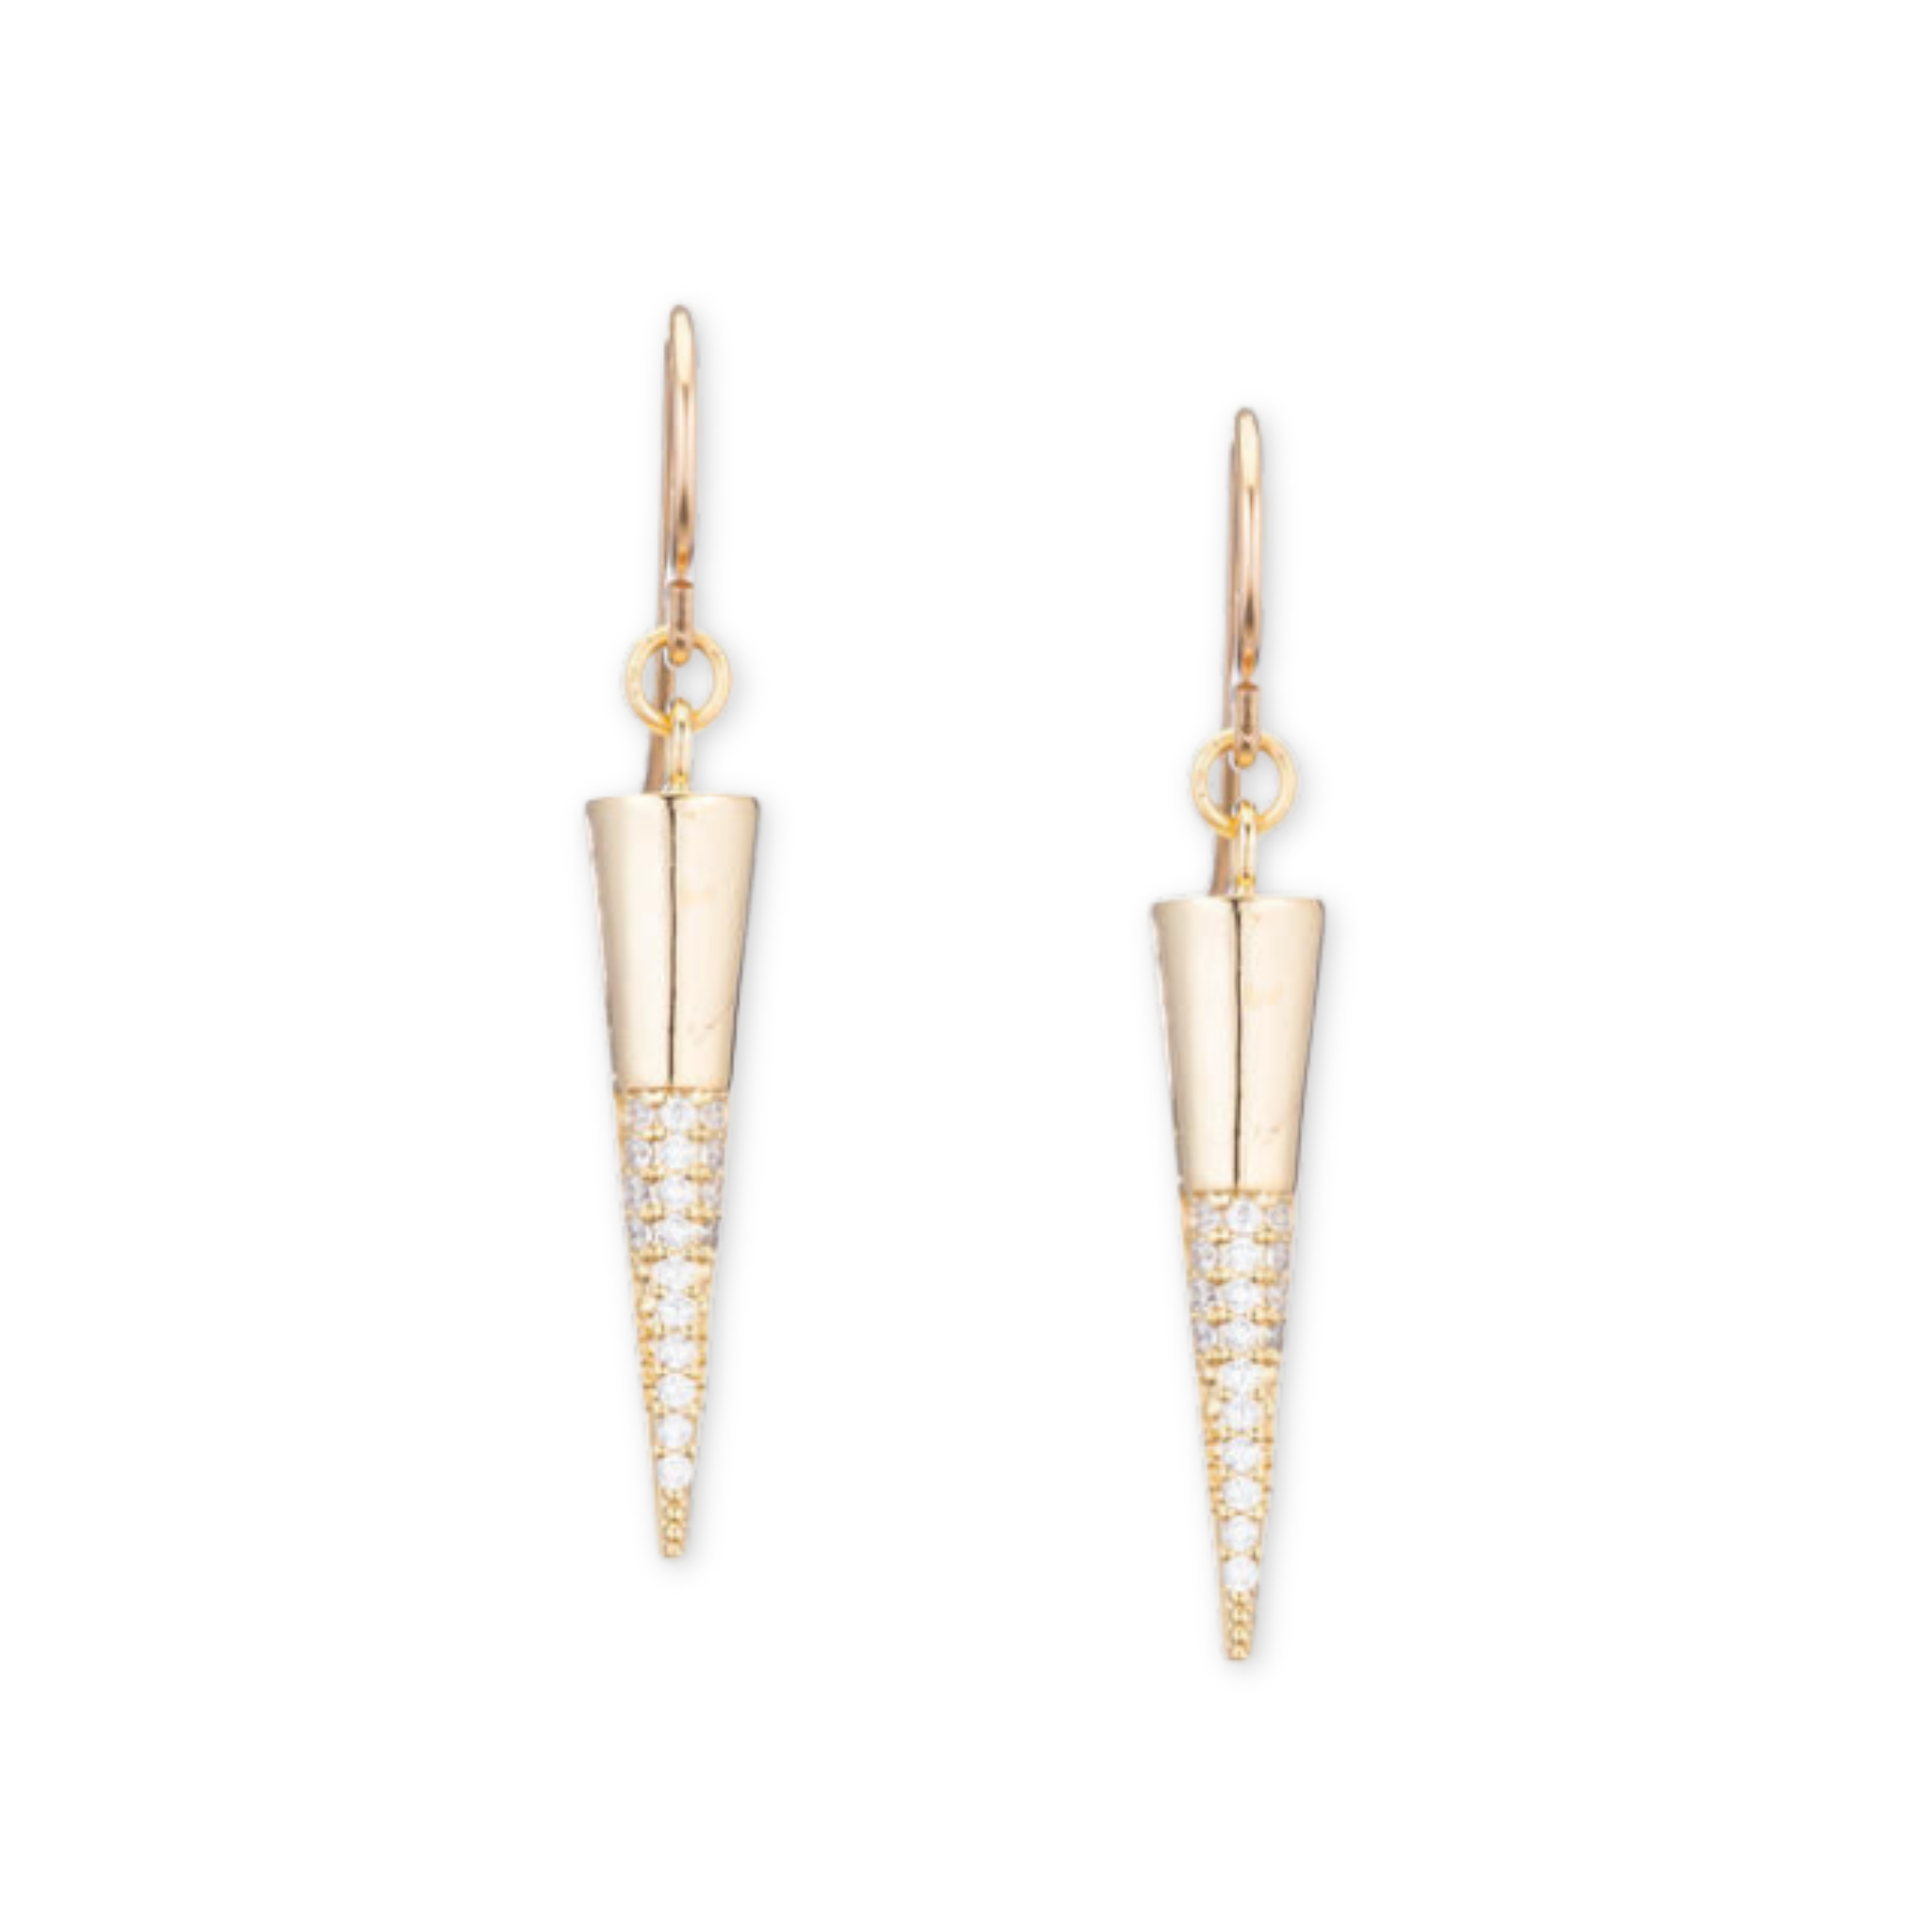 dangling cone shaped earring with crystal tips